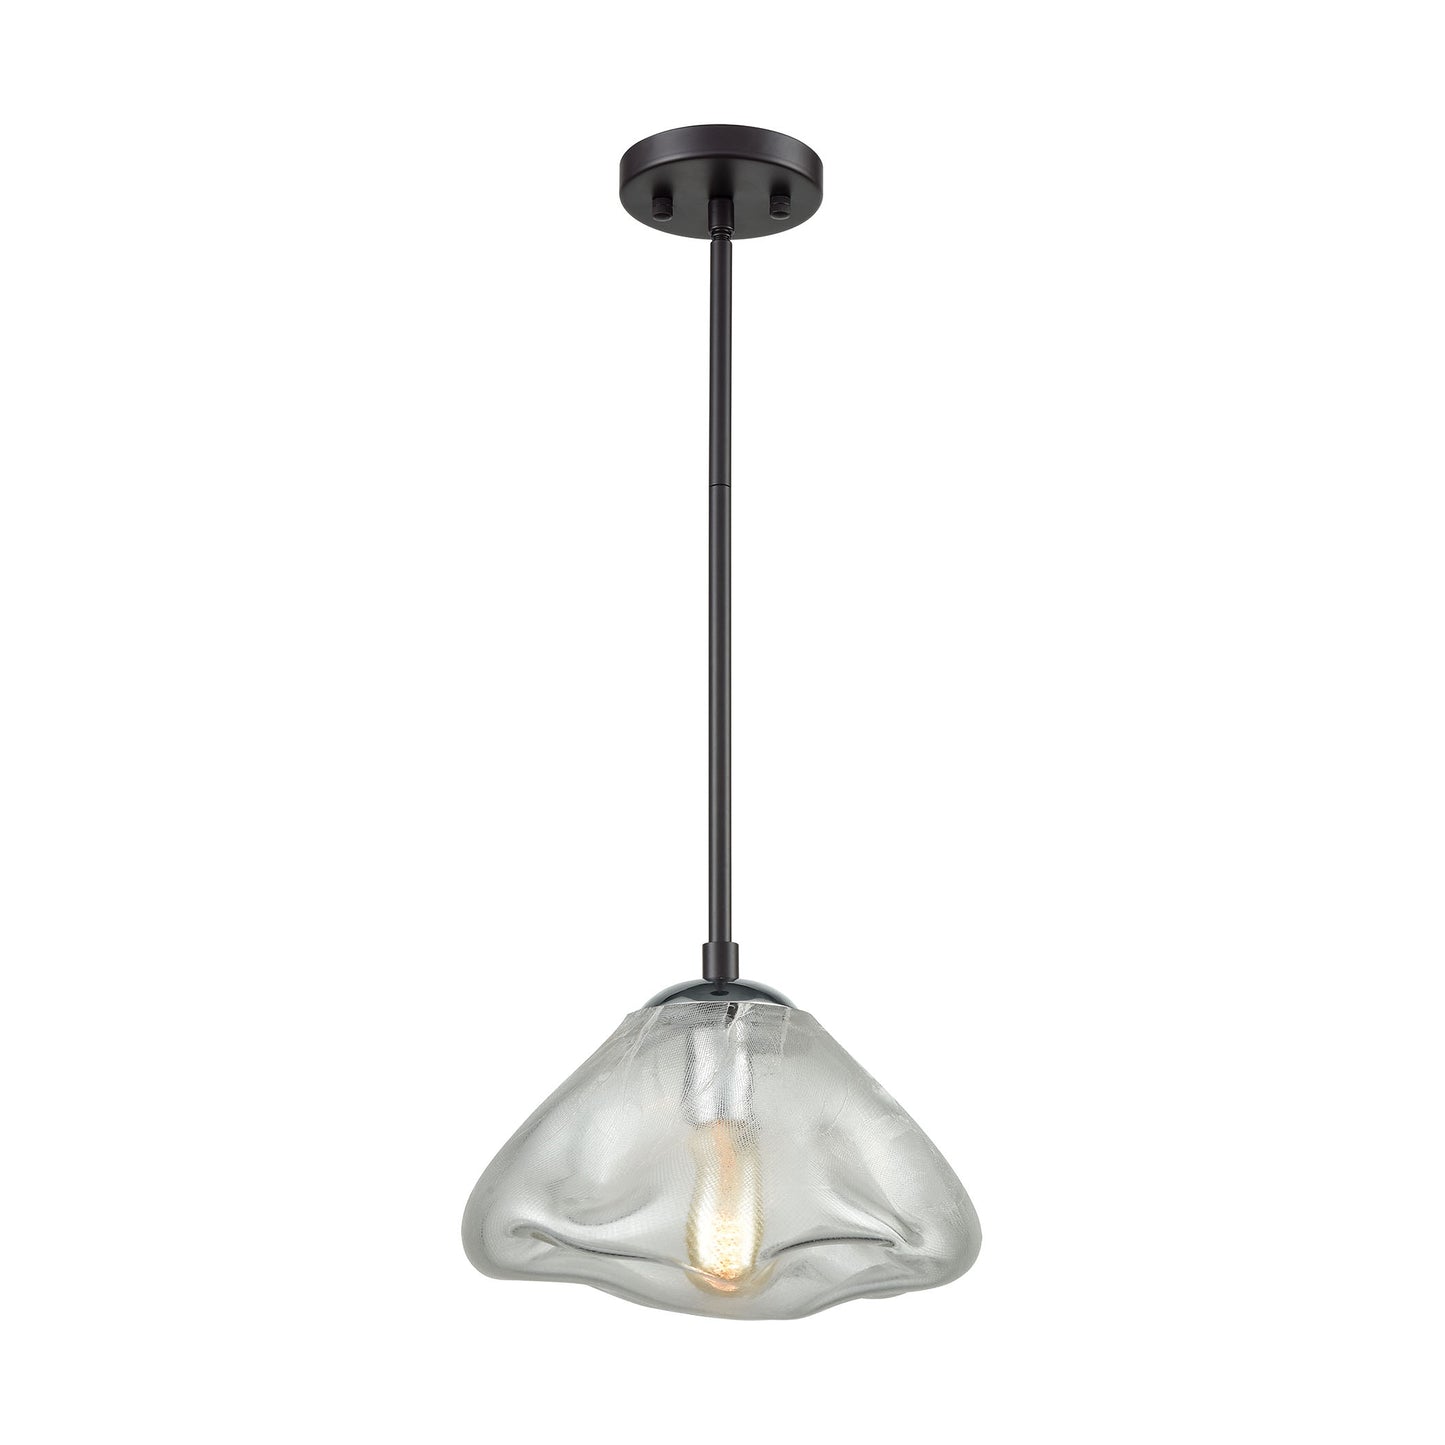 ELK Lighting 15330/1 - Kendal 11" Wide 1-Light Mini Pendant in Oil Rubbed Bronze and Polished Chrome